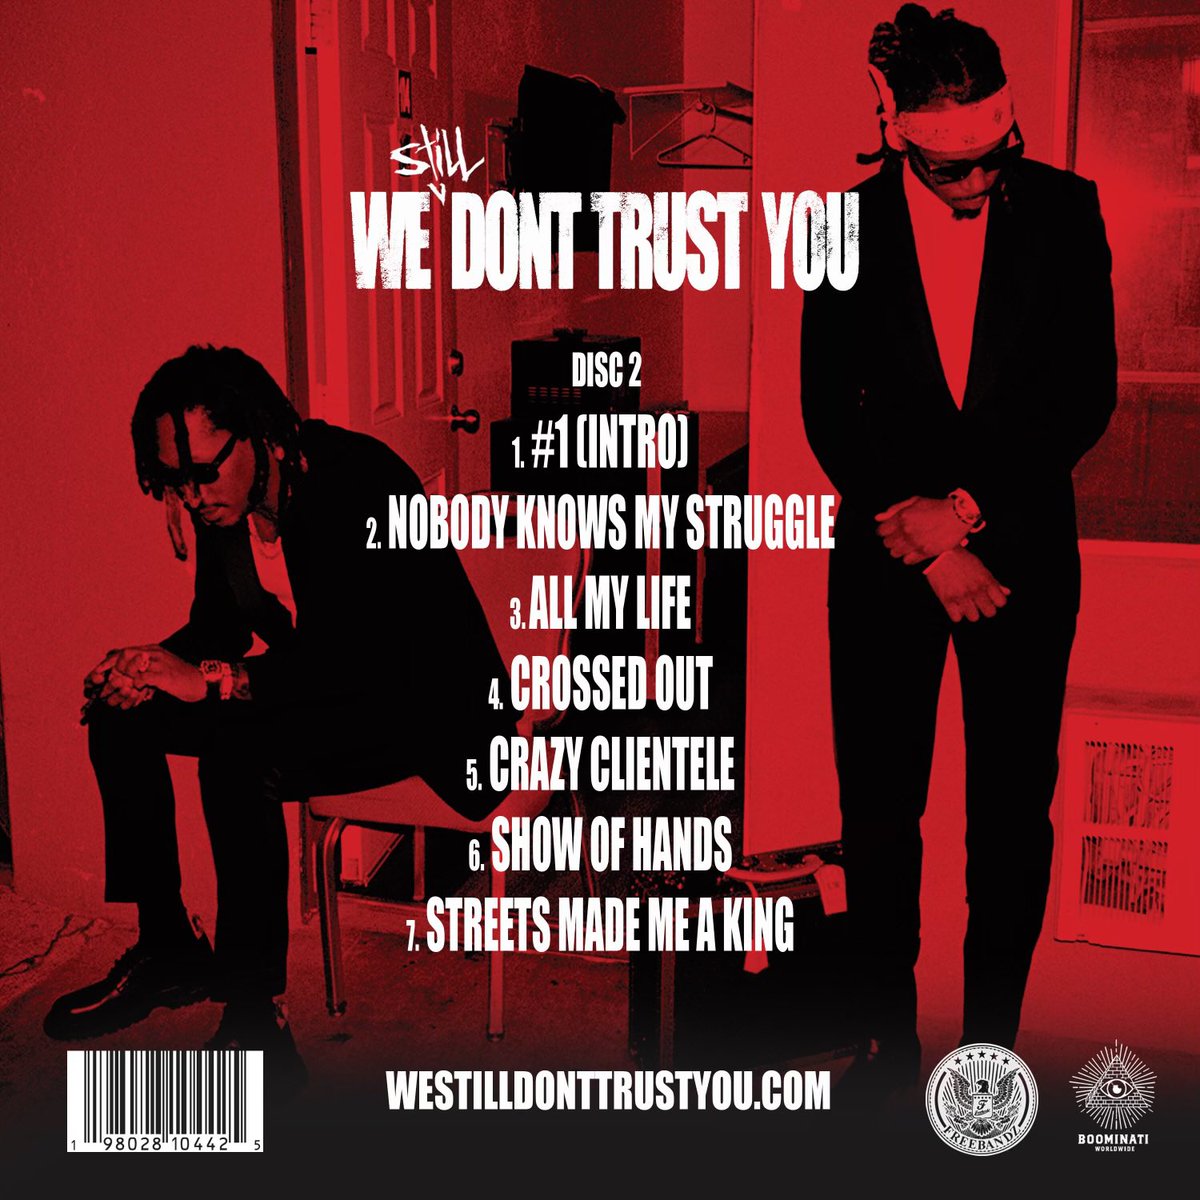 dropped a mixtape with that classic Pluto x Metro sound as a gift for all the support! #WeStillDontTrustYou